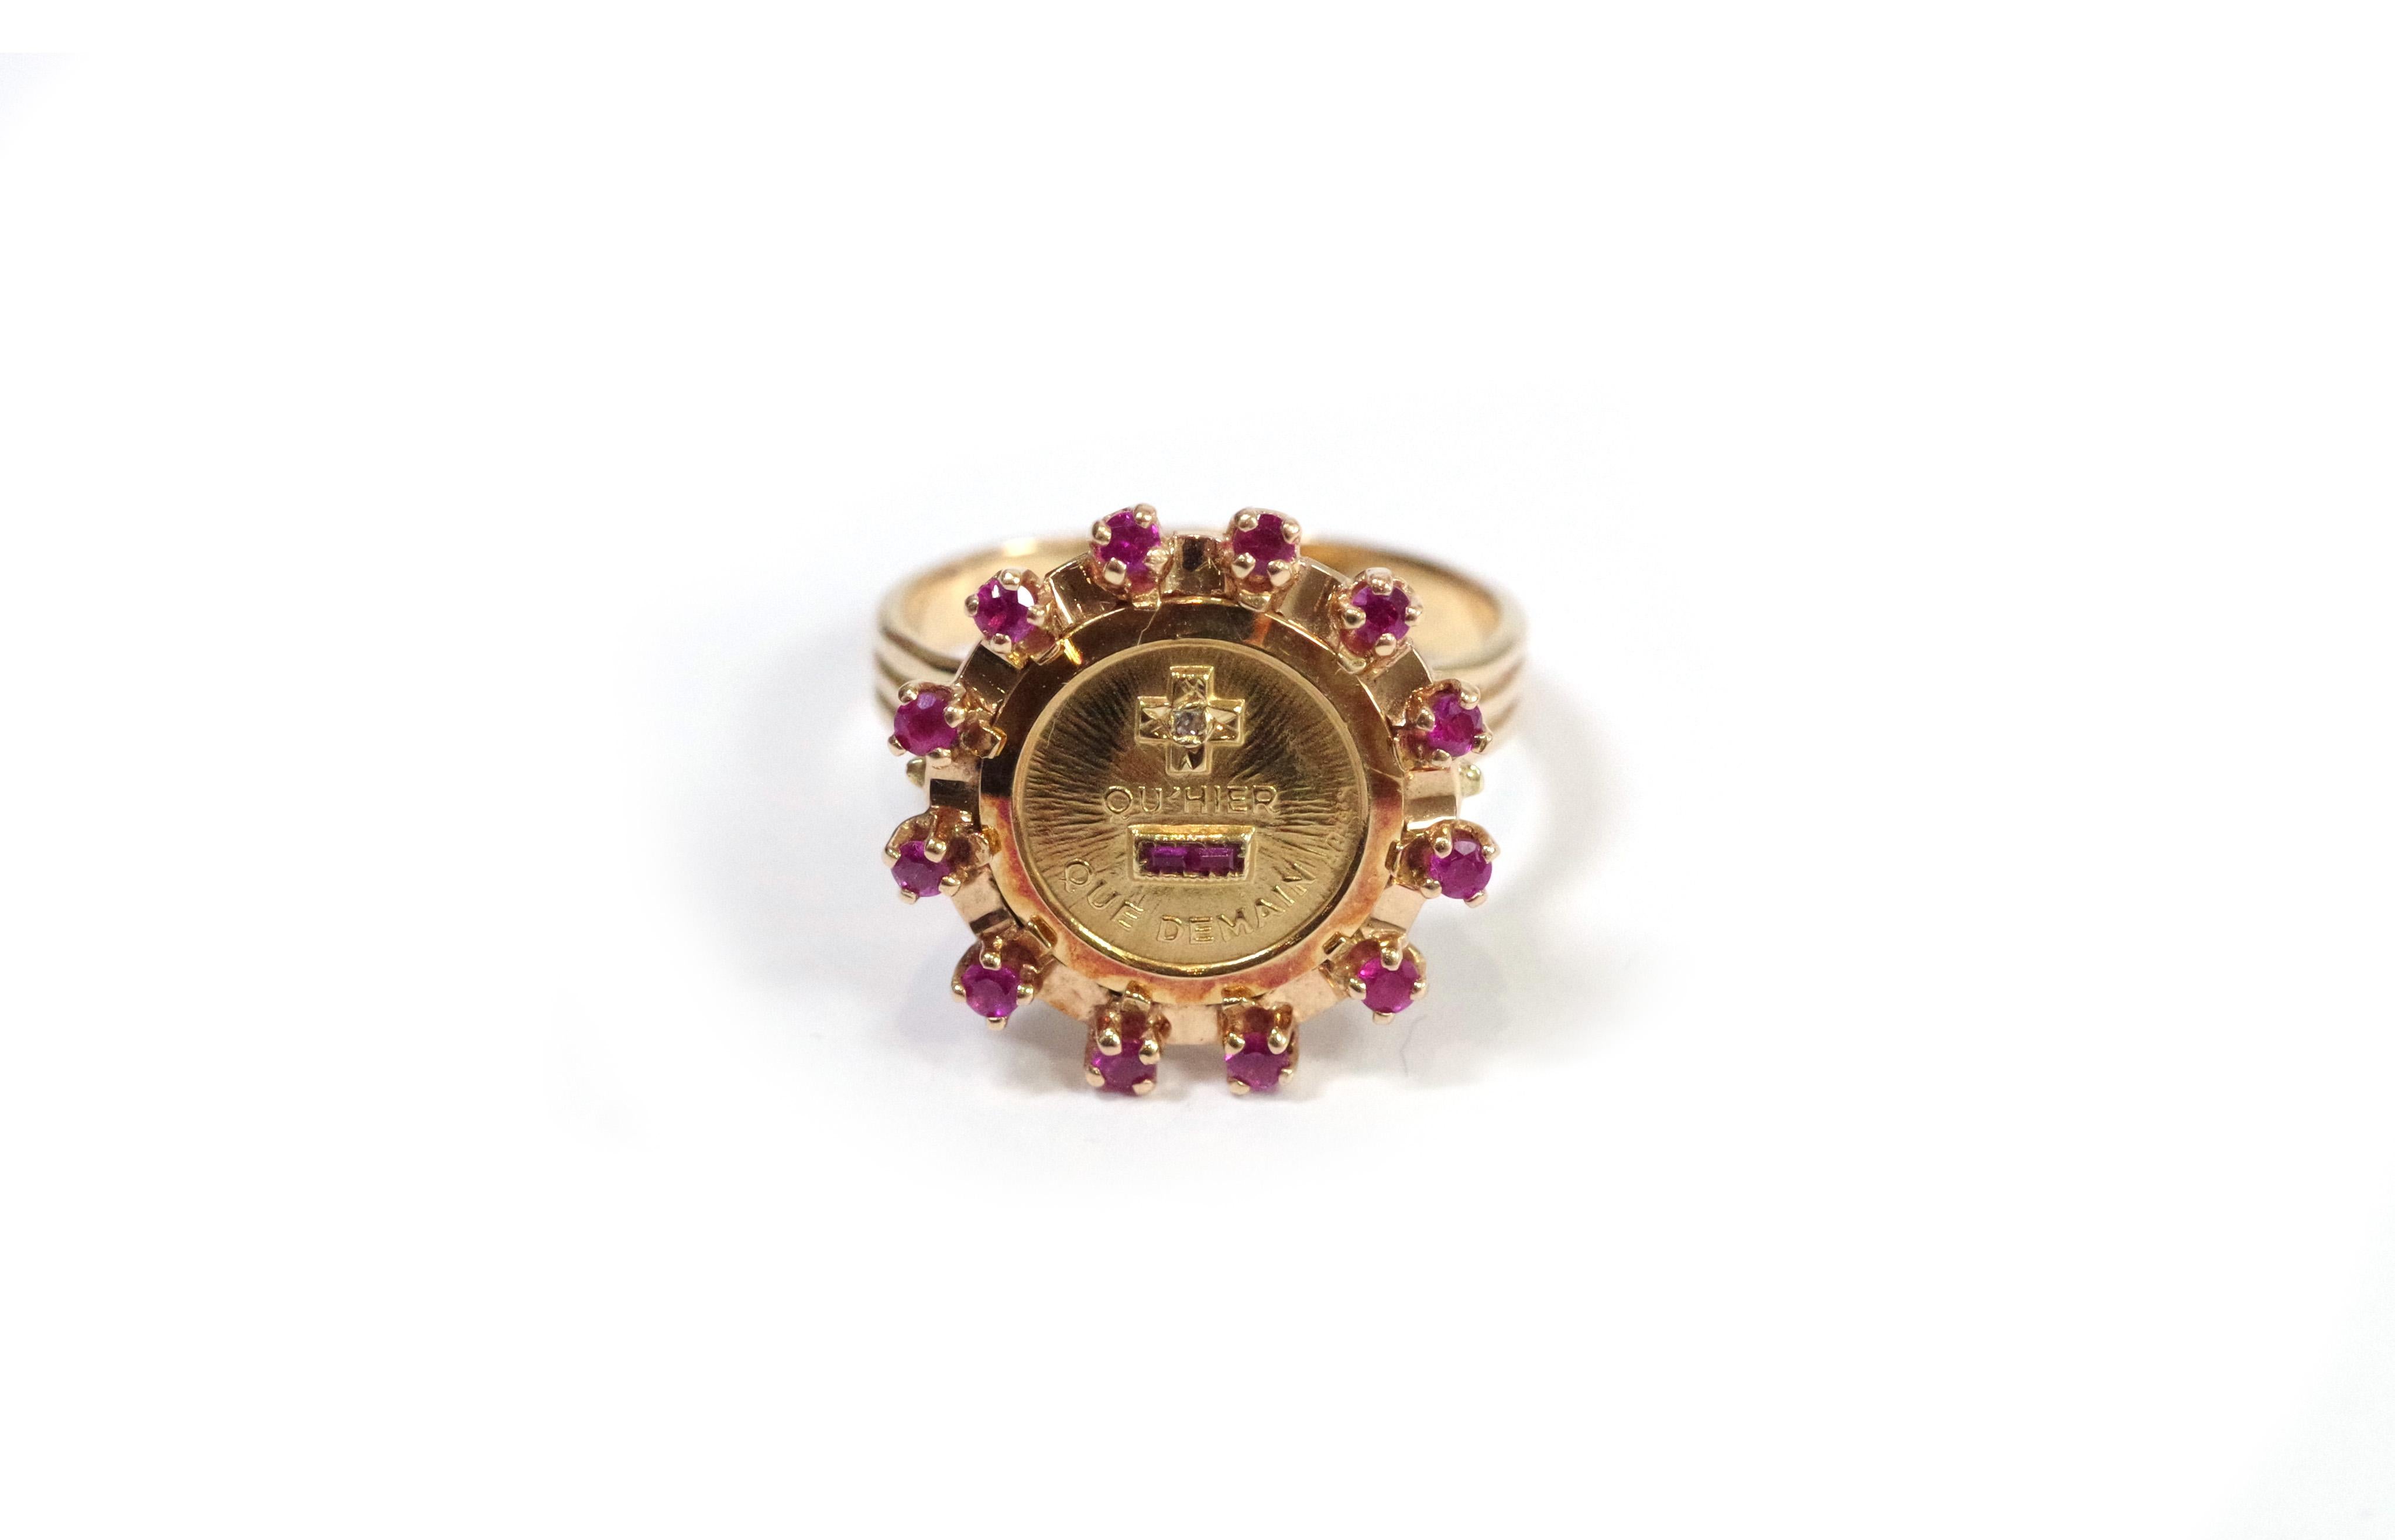 Augis halo ruby ring in 18 karat rose gold. Retro ring adorned with a 